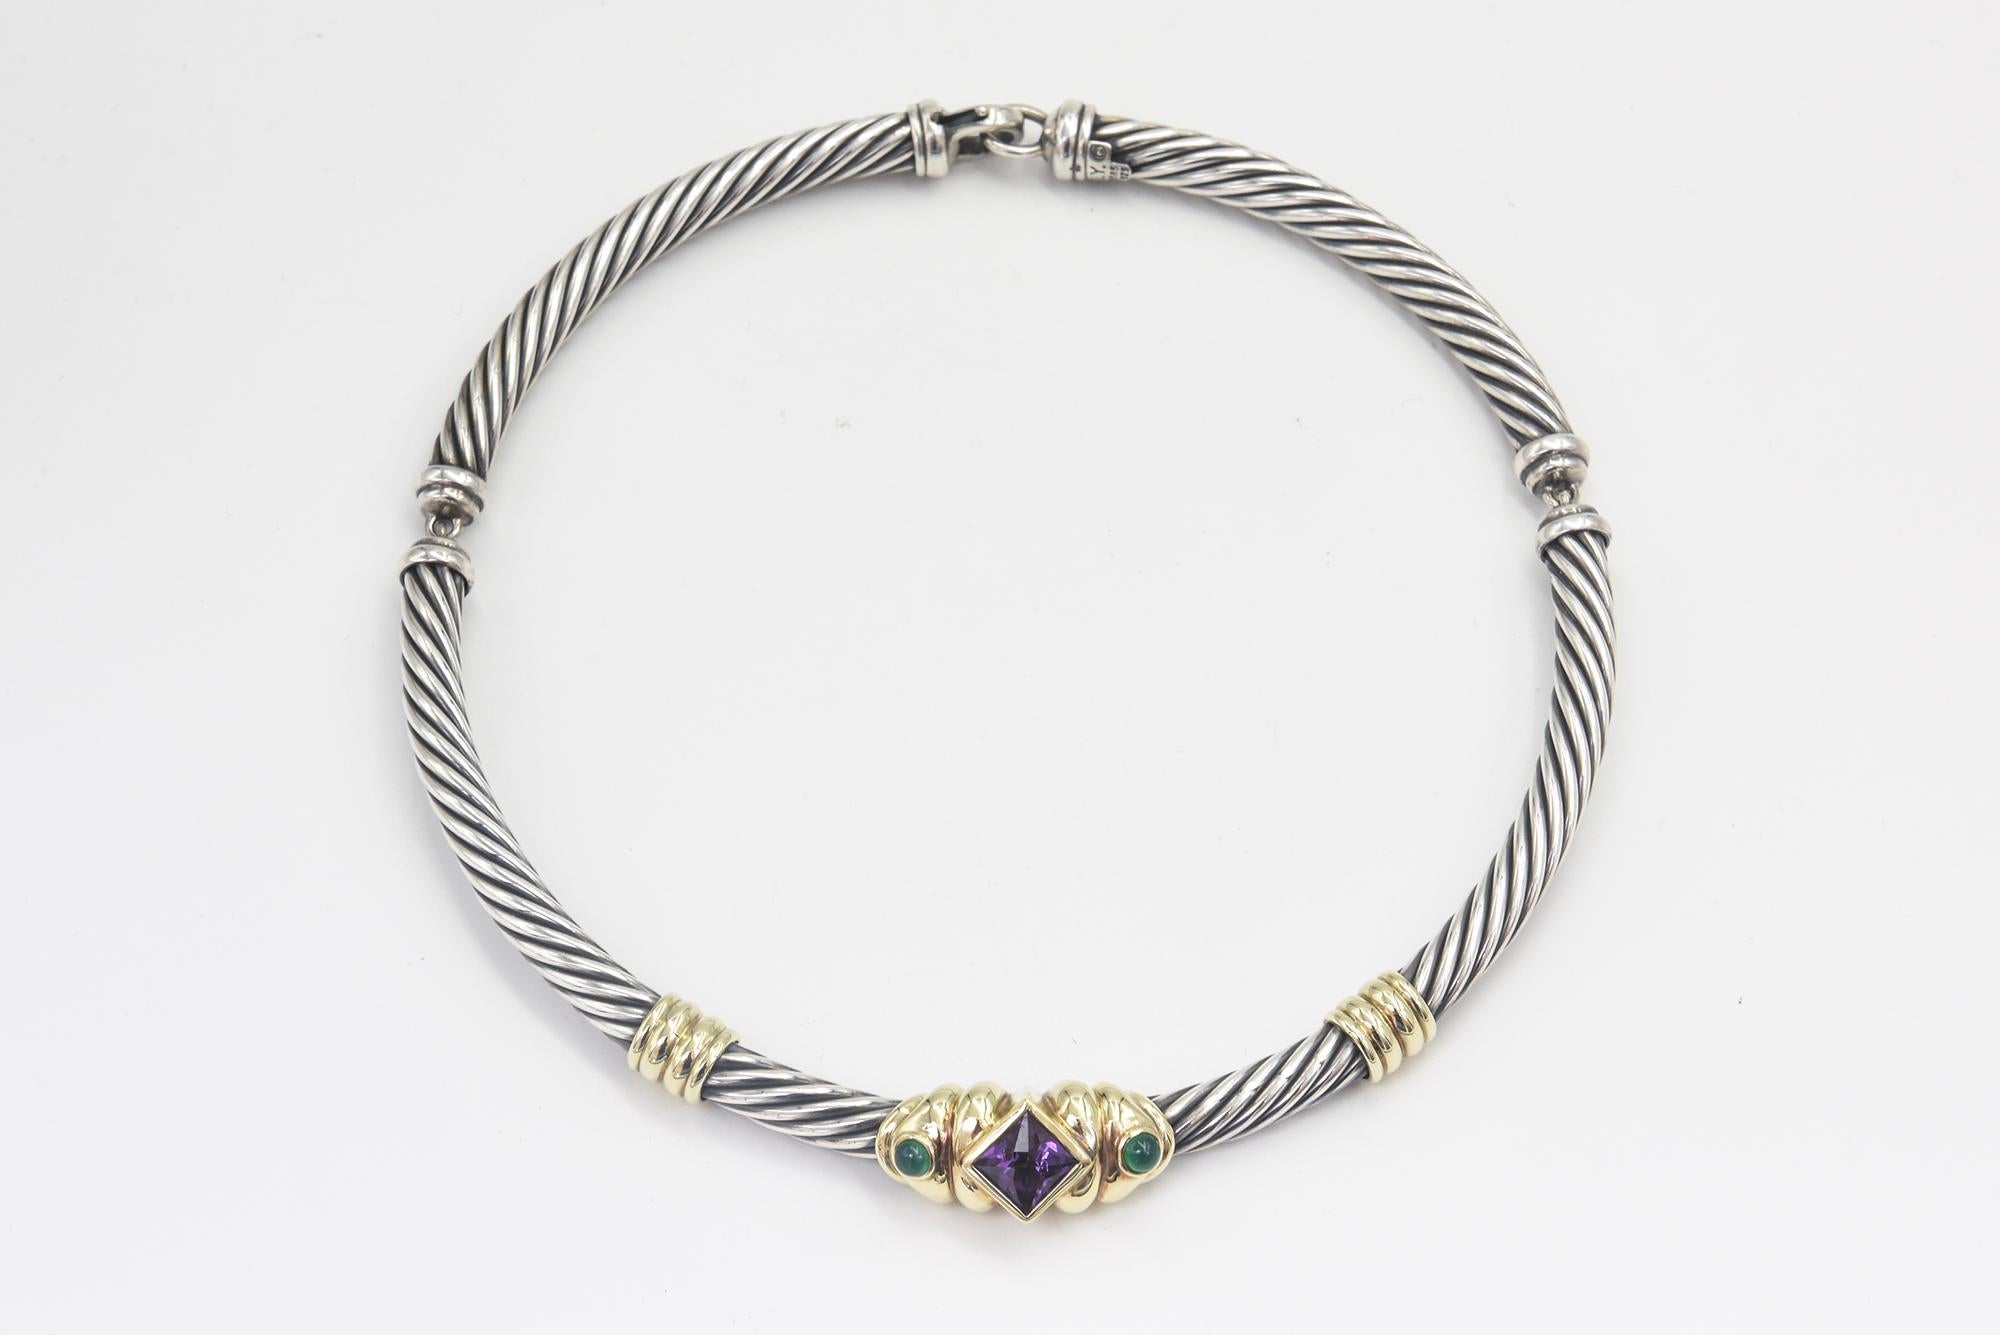 Classic David Yurman Renaissance Chocker Necklace made of a sterling silver twisted cable with 14k yellow gold stations. The sterling area cable is approximately 7mm thick and the necklace is approximately 16